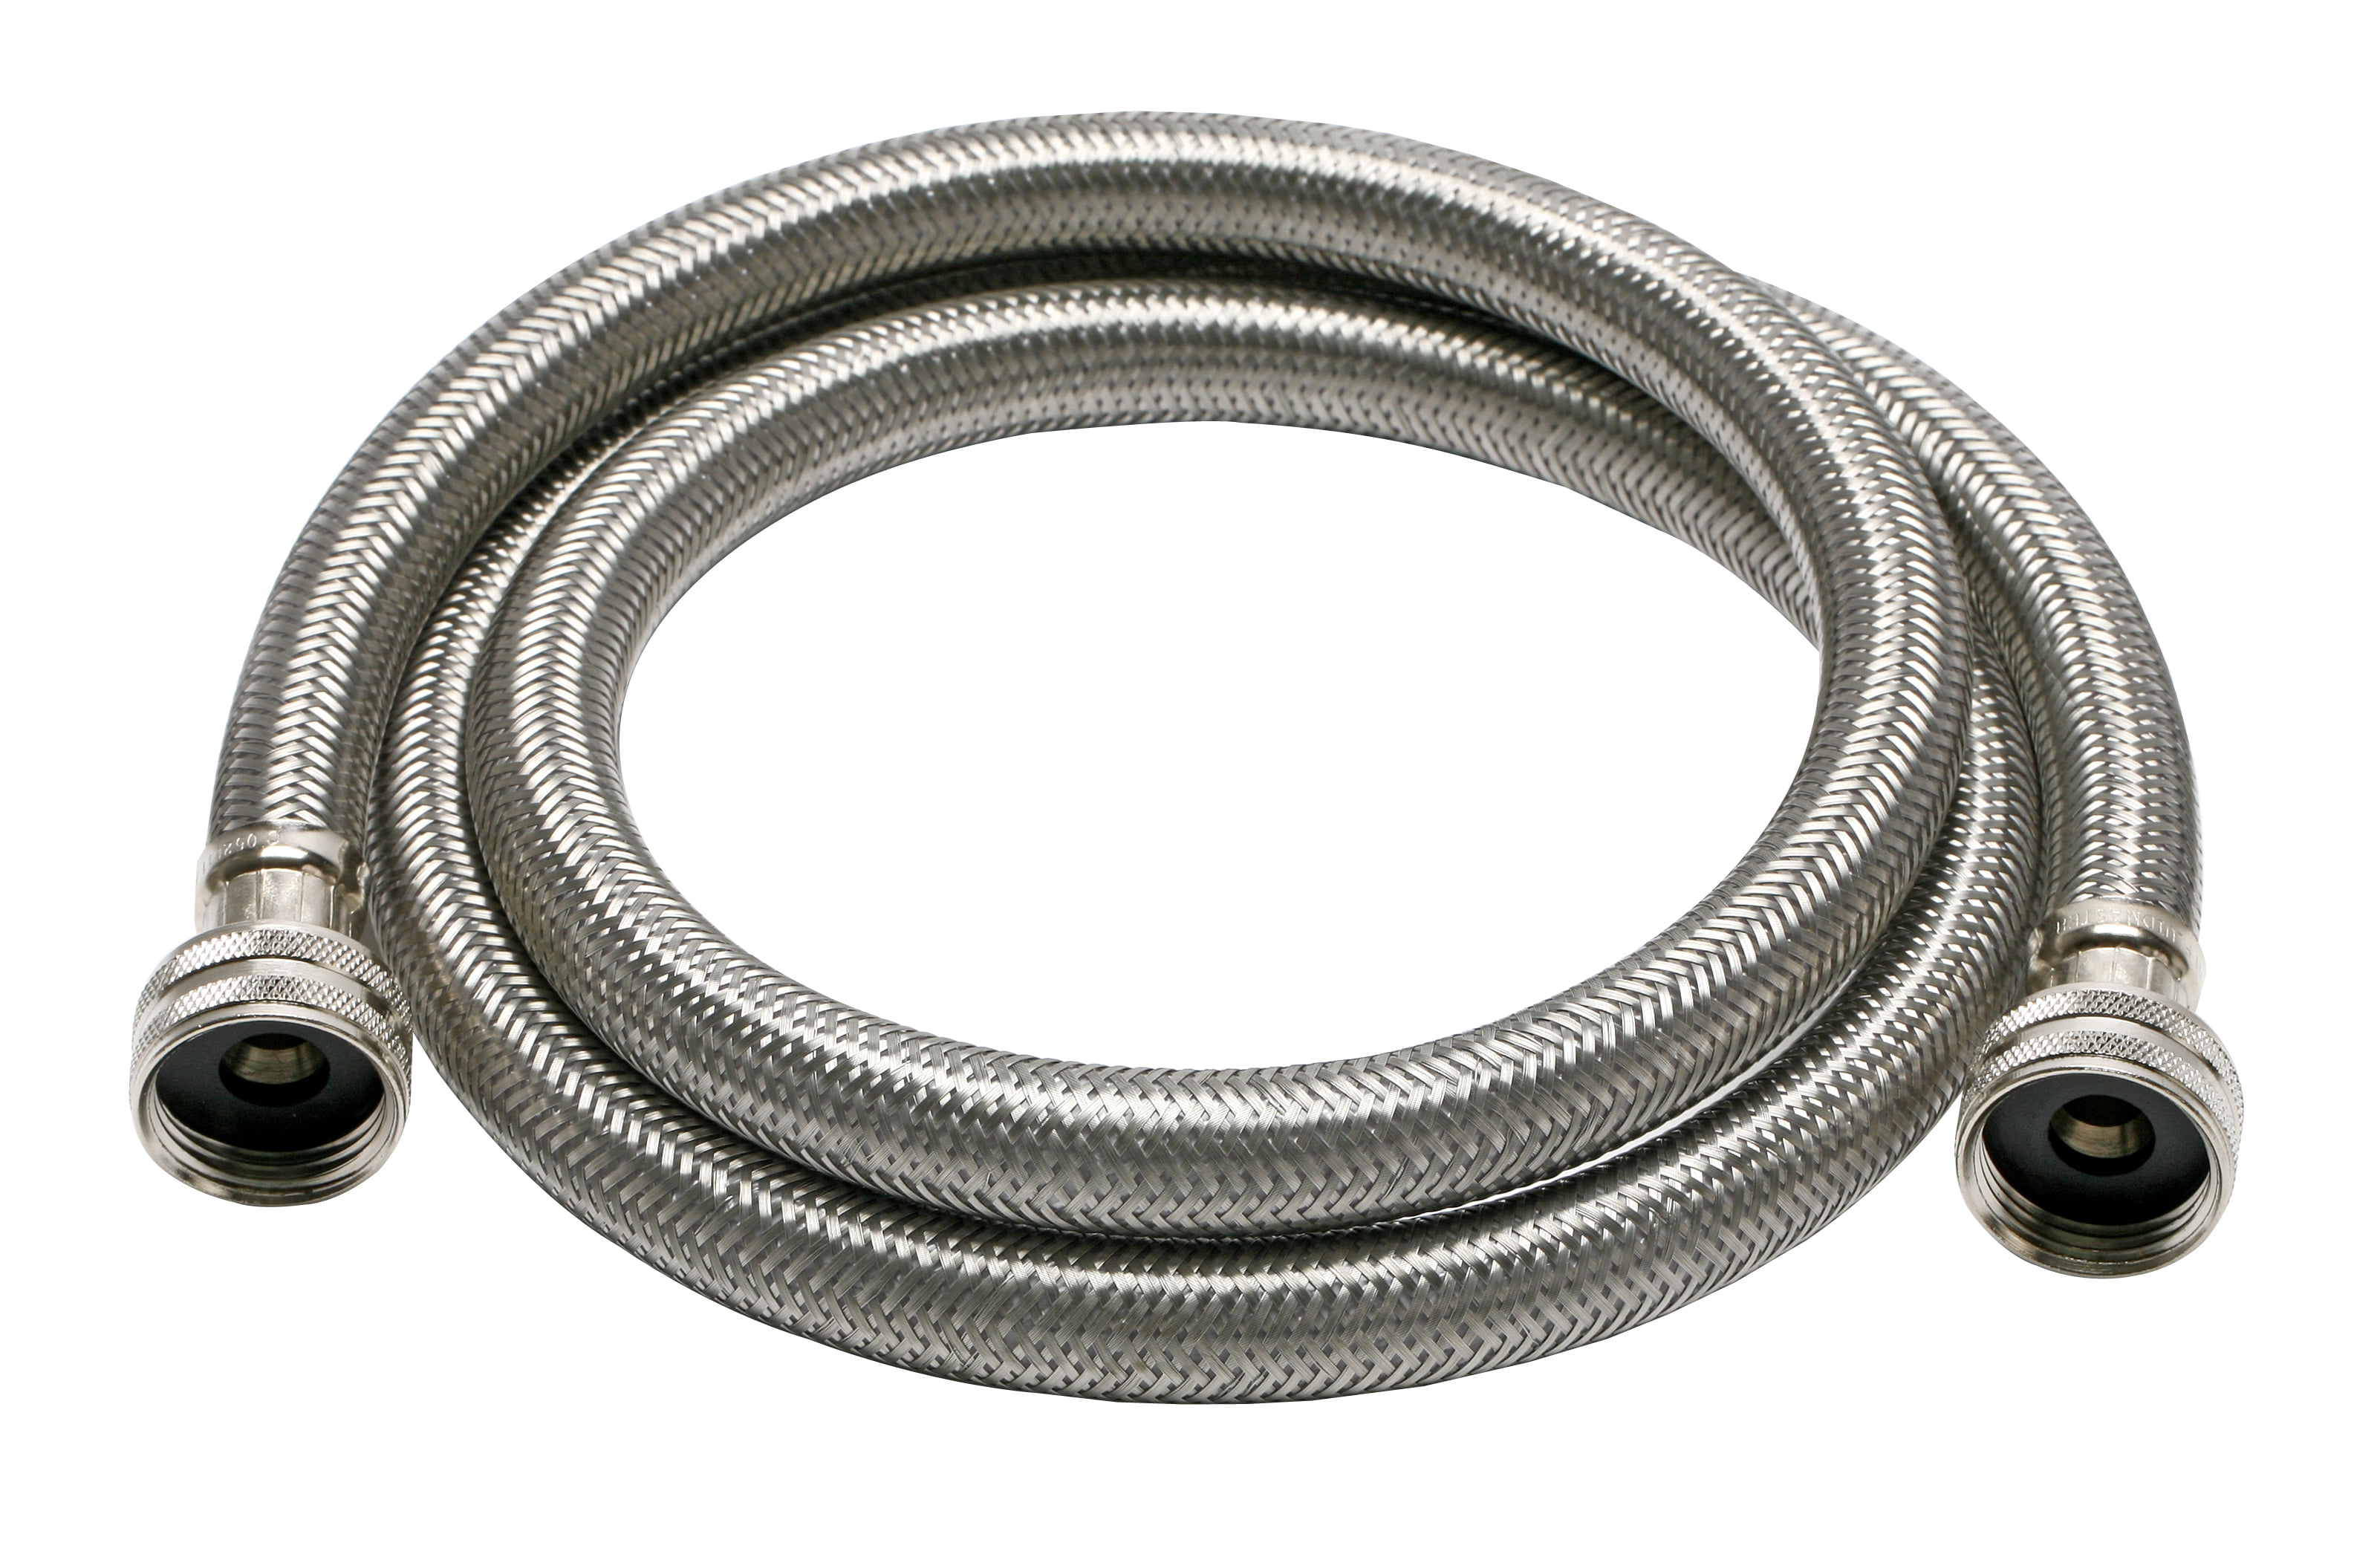 Watflow Ice Maker Hose with 1/4 Comp by 1/4 Comp Connection, 5F Flexible  Braided Stainless Steel Hose